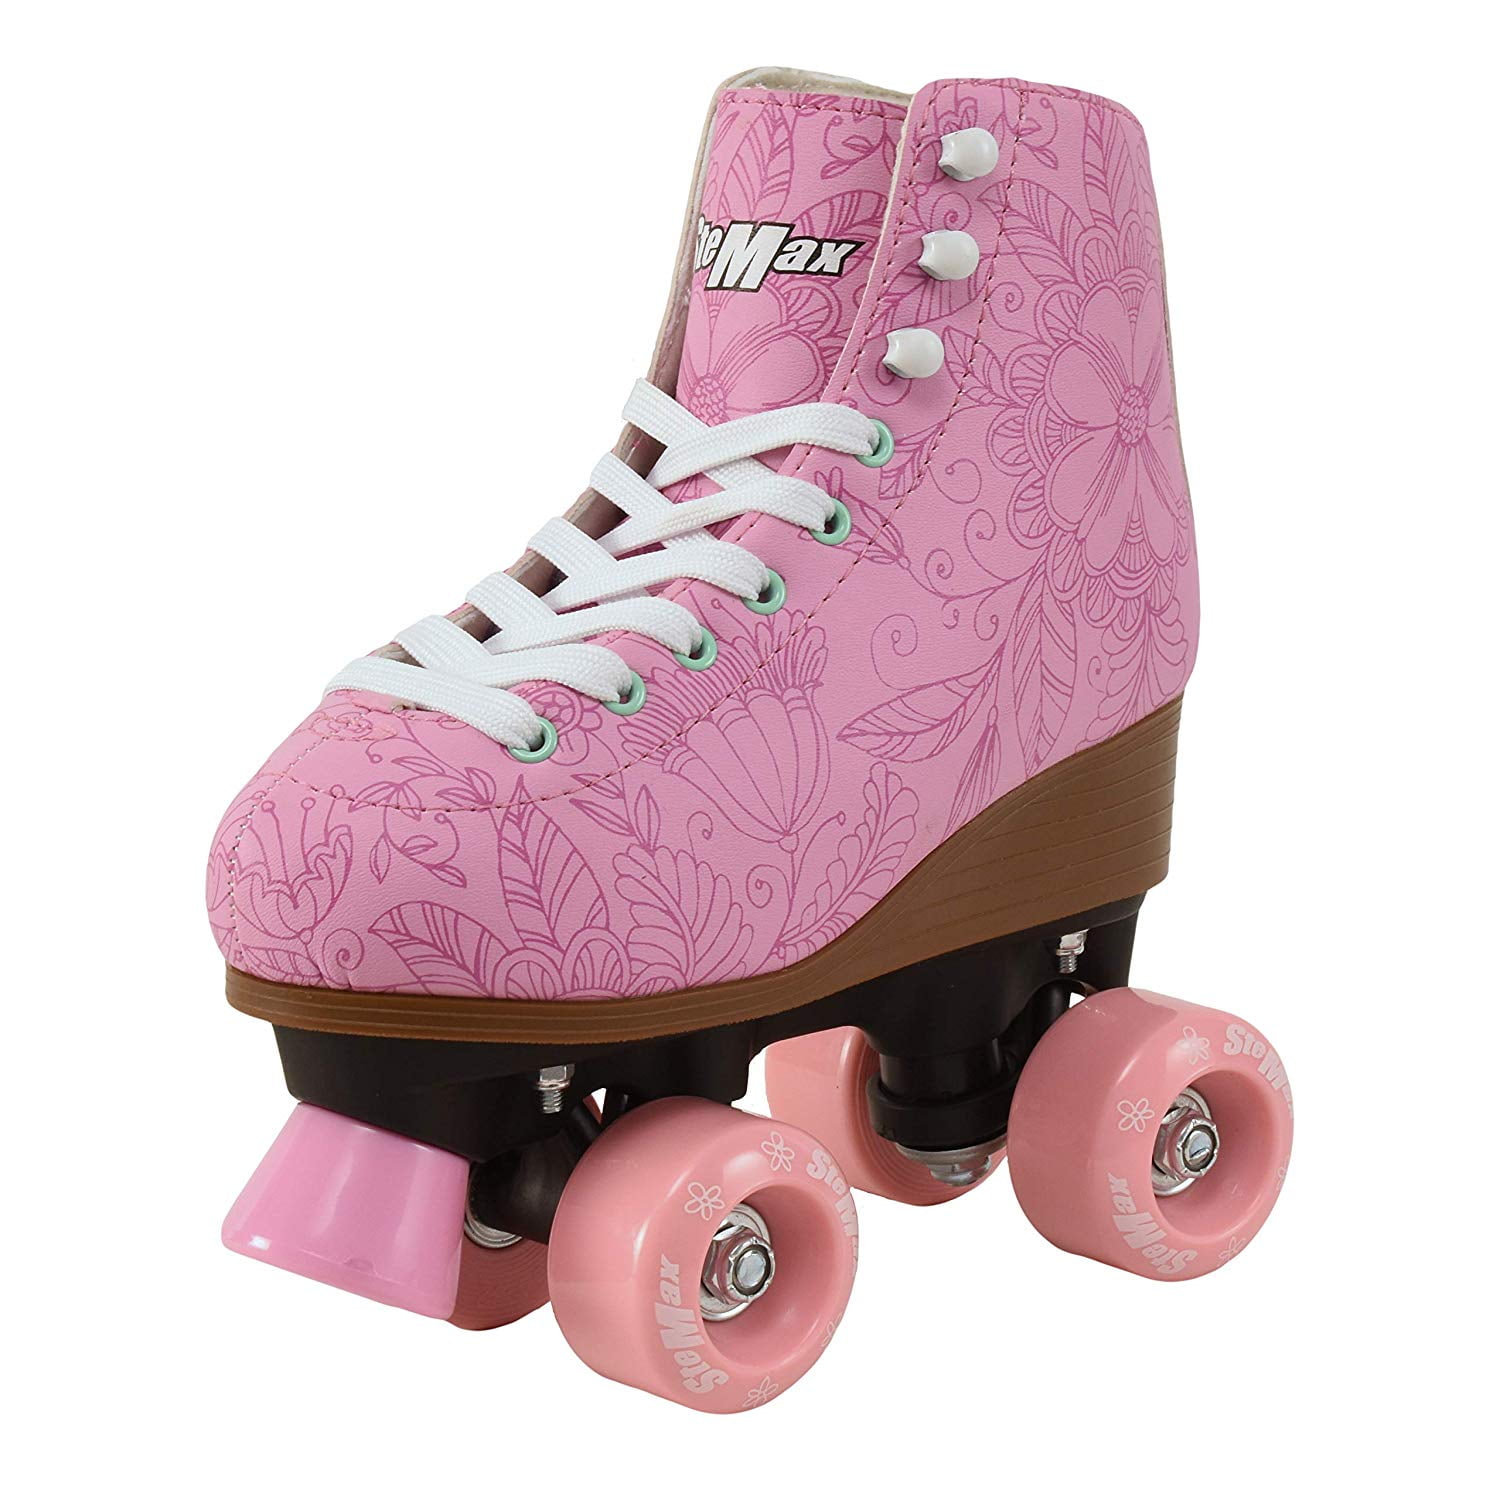 Women's Roller Skates Classic Shiny Roller Skates for Beginner Kids Adults and Youth Indoor and Outdoor Use with Bag Adjustable PU Leather High Top Double Row Skates 